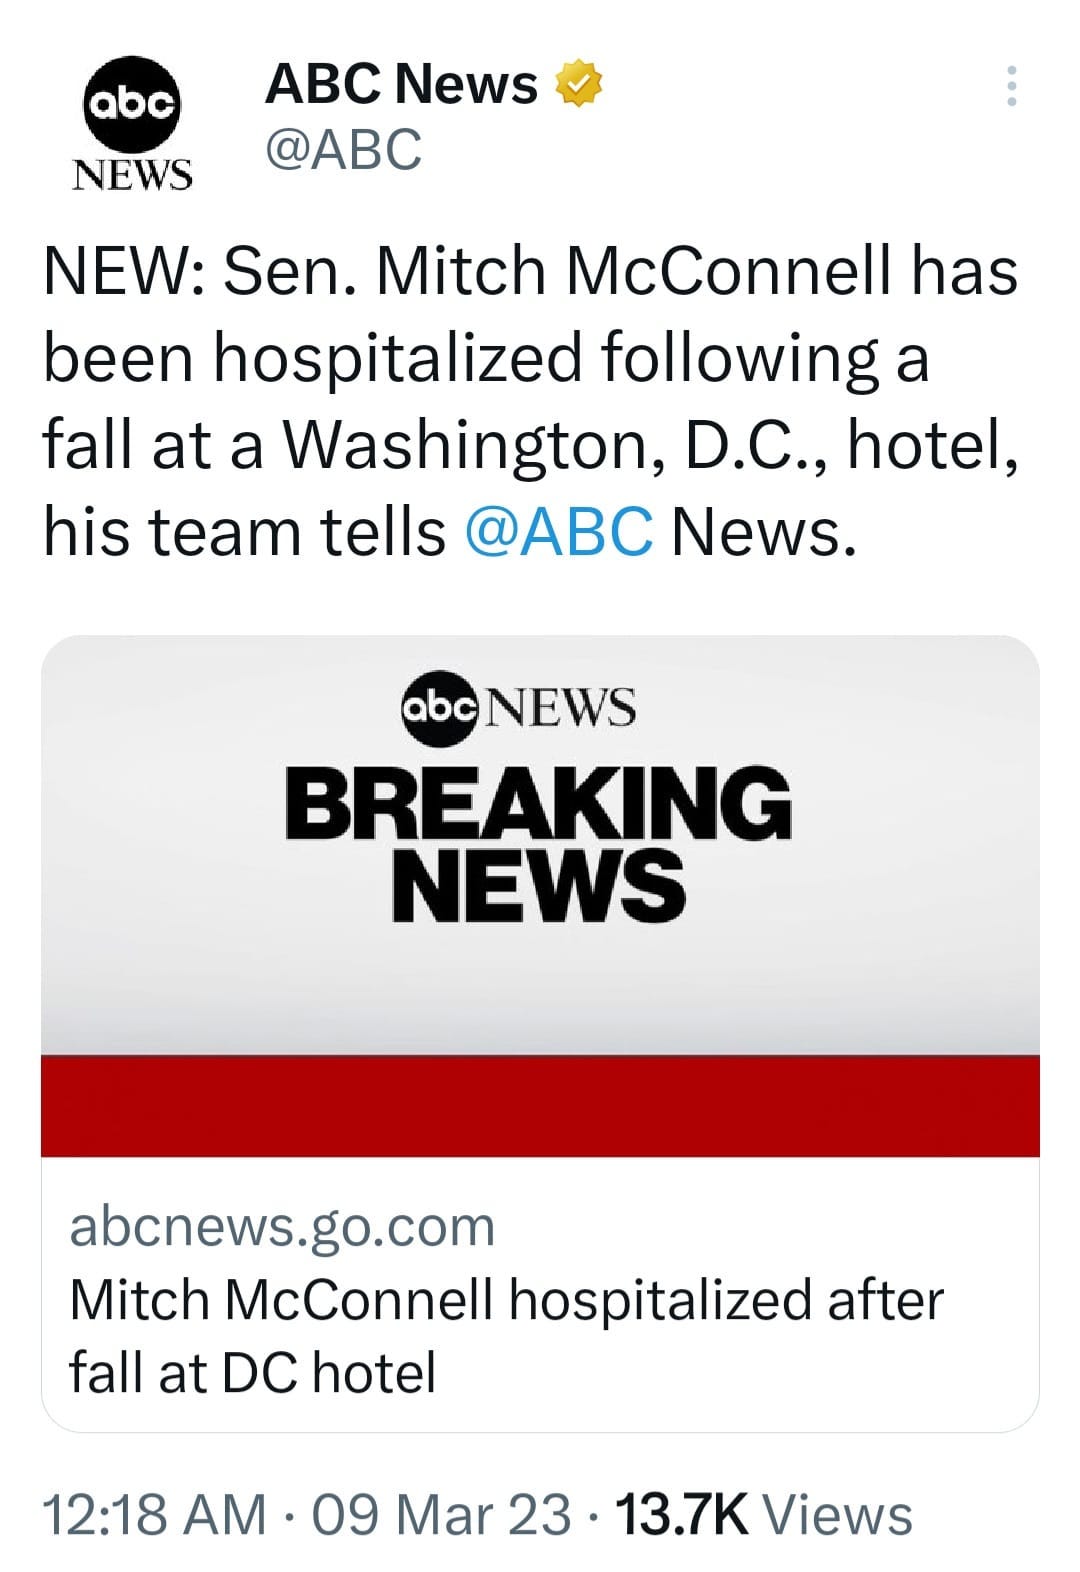 May be a Twitter screenshot of text that says 'abc NEWS ABC News @ABC NEW: Sen. Mitch McConnell has been hospitalized following a fall at a Washington, D.C., hotel, his team tells @ABC News. abc NEWS BREAKING NEWS abcnews. go.com Mitch McConnell hospitalized after fall at DC hotel 12:18 AM 09 Mar 23 13.7K Views'